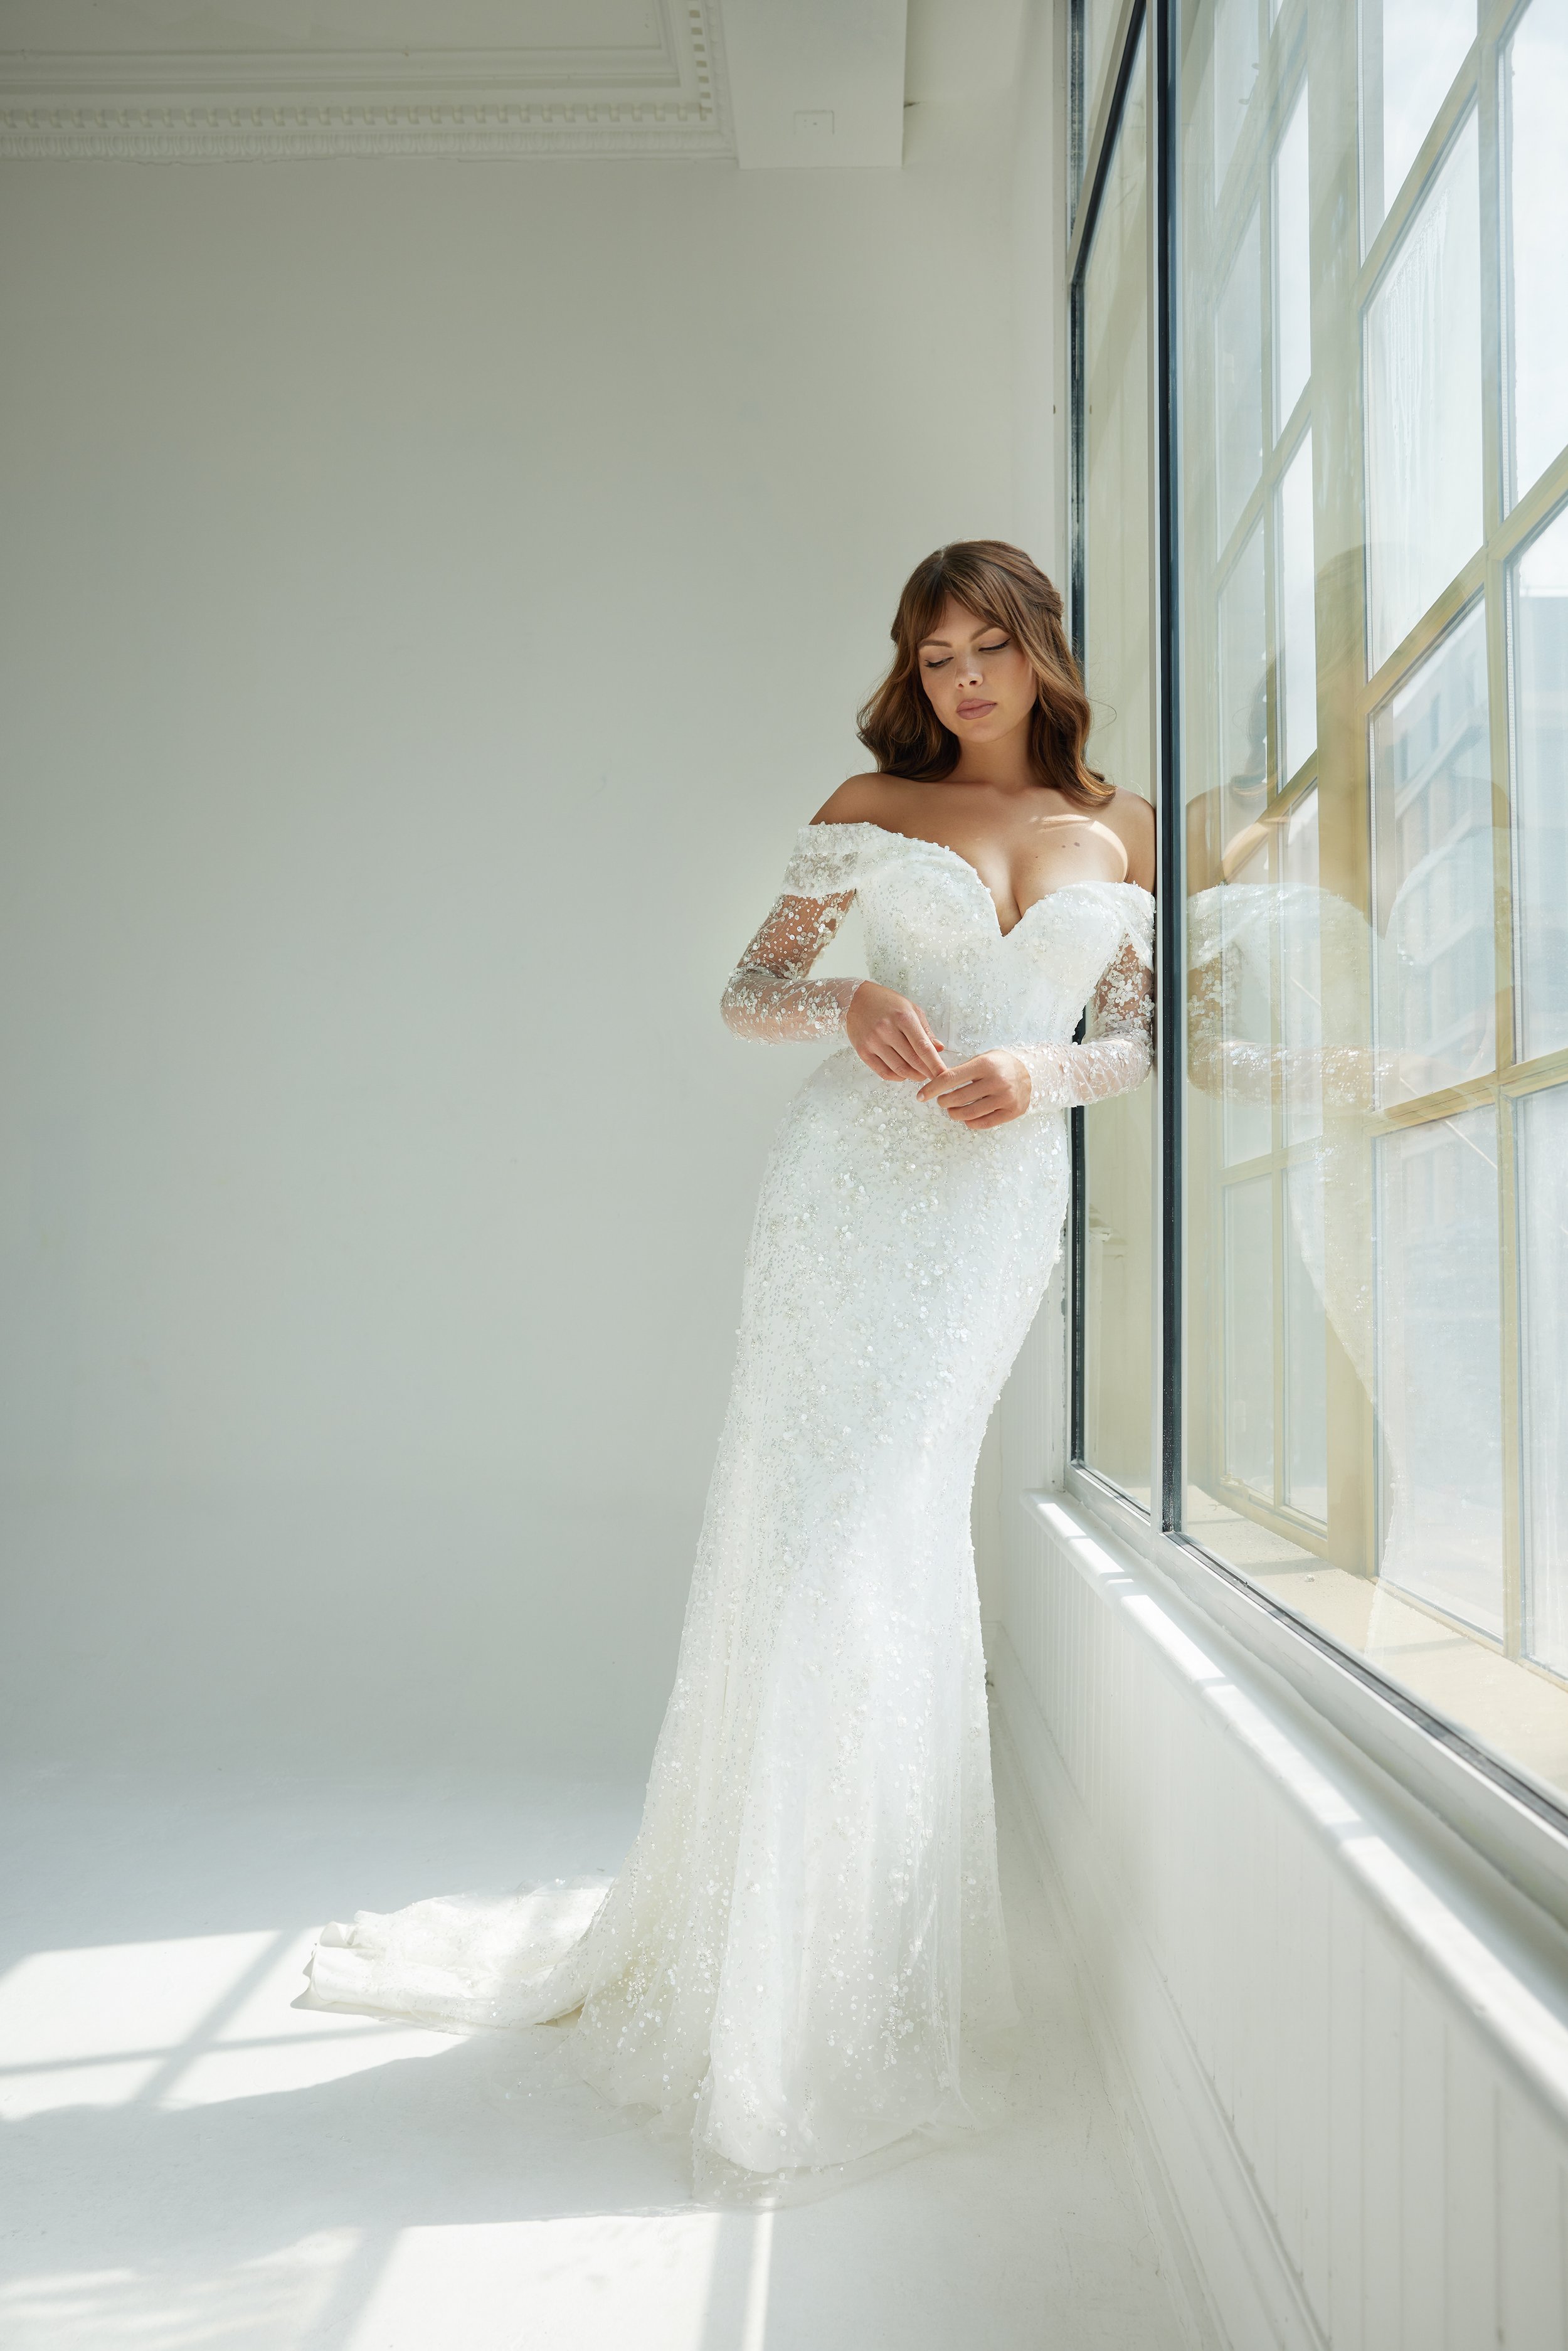 Excelsior by Suzanne Neville at Frances Day Bridal 